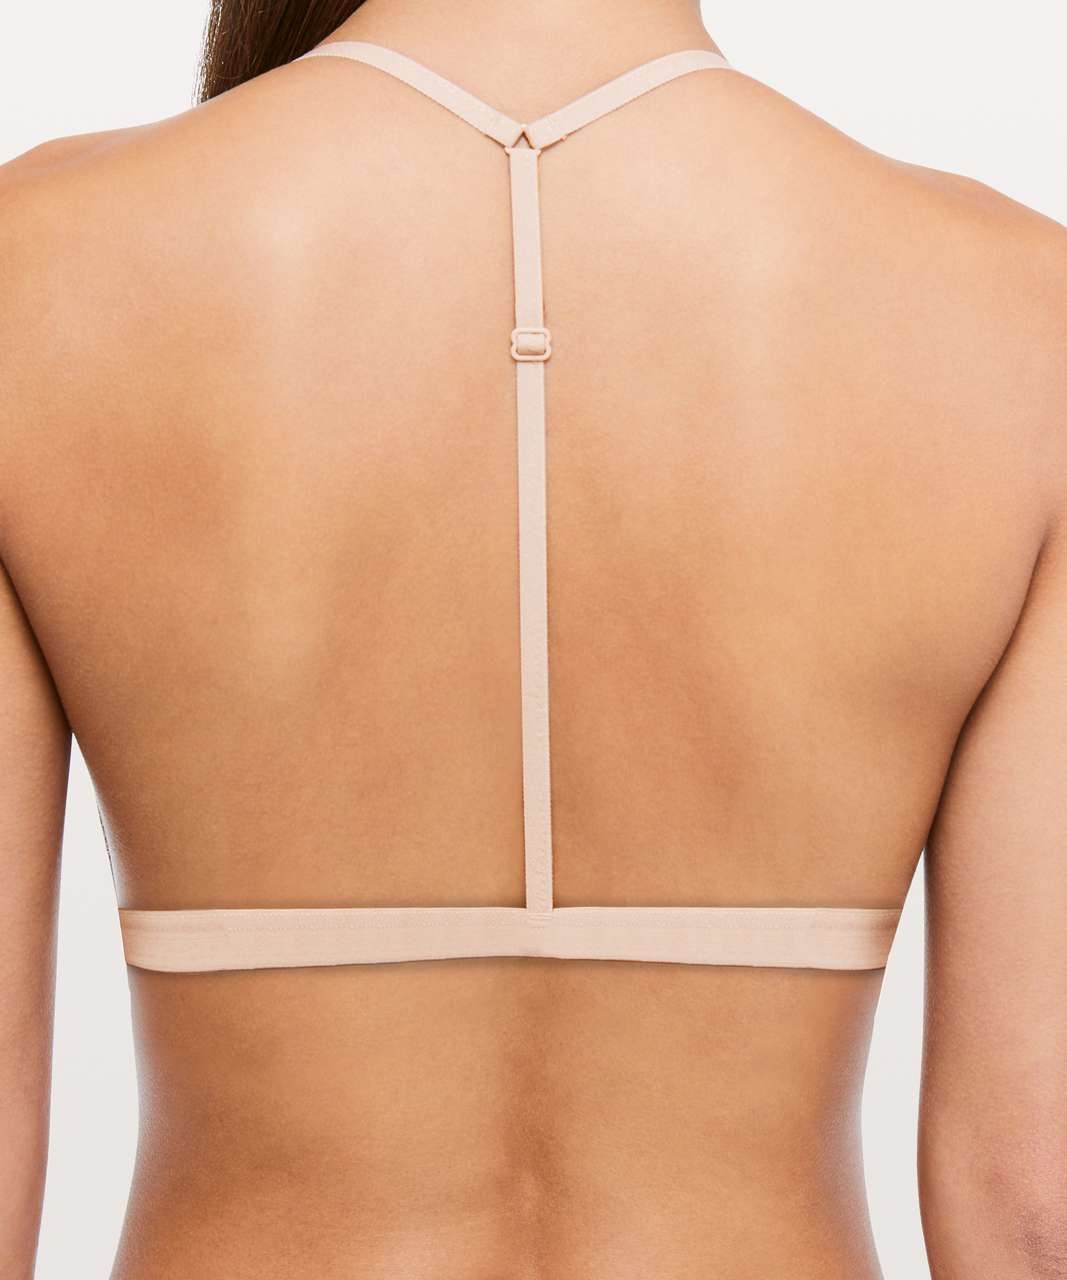 Lululemon Simply There Triangle Bralette - Crepe